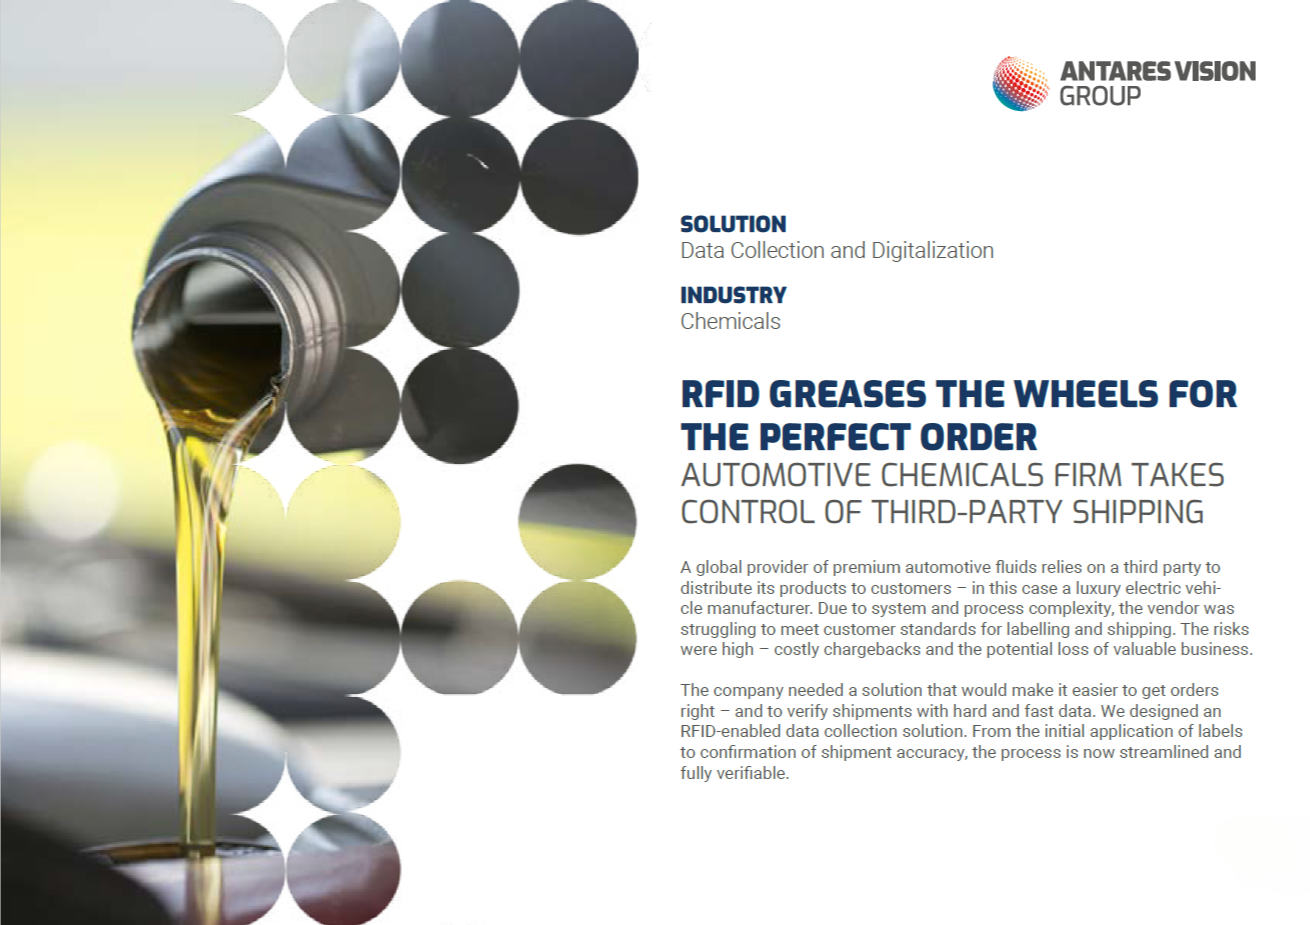 RFID GREASES THE WHEELS FOR THE PERFECT ORDER